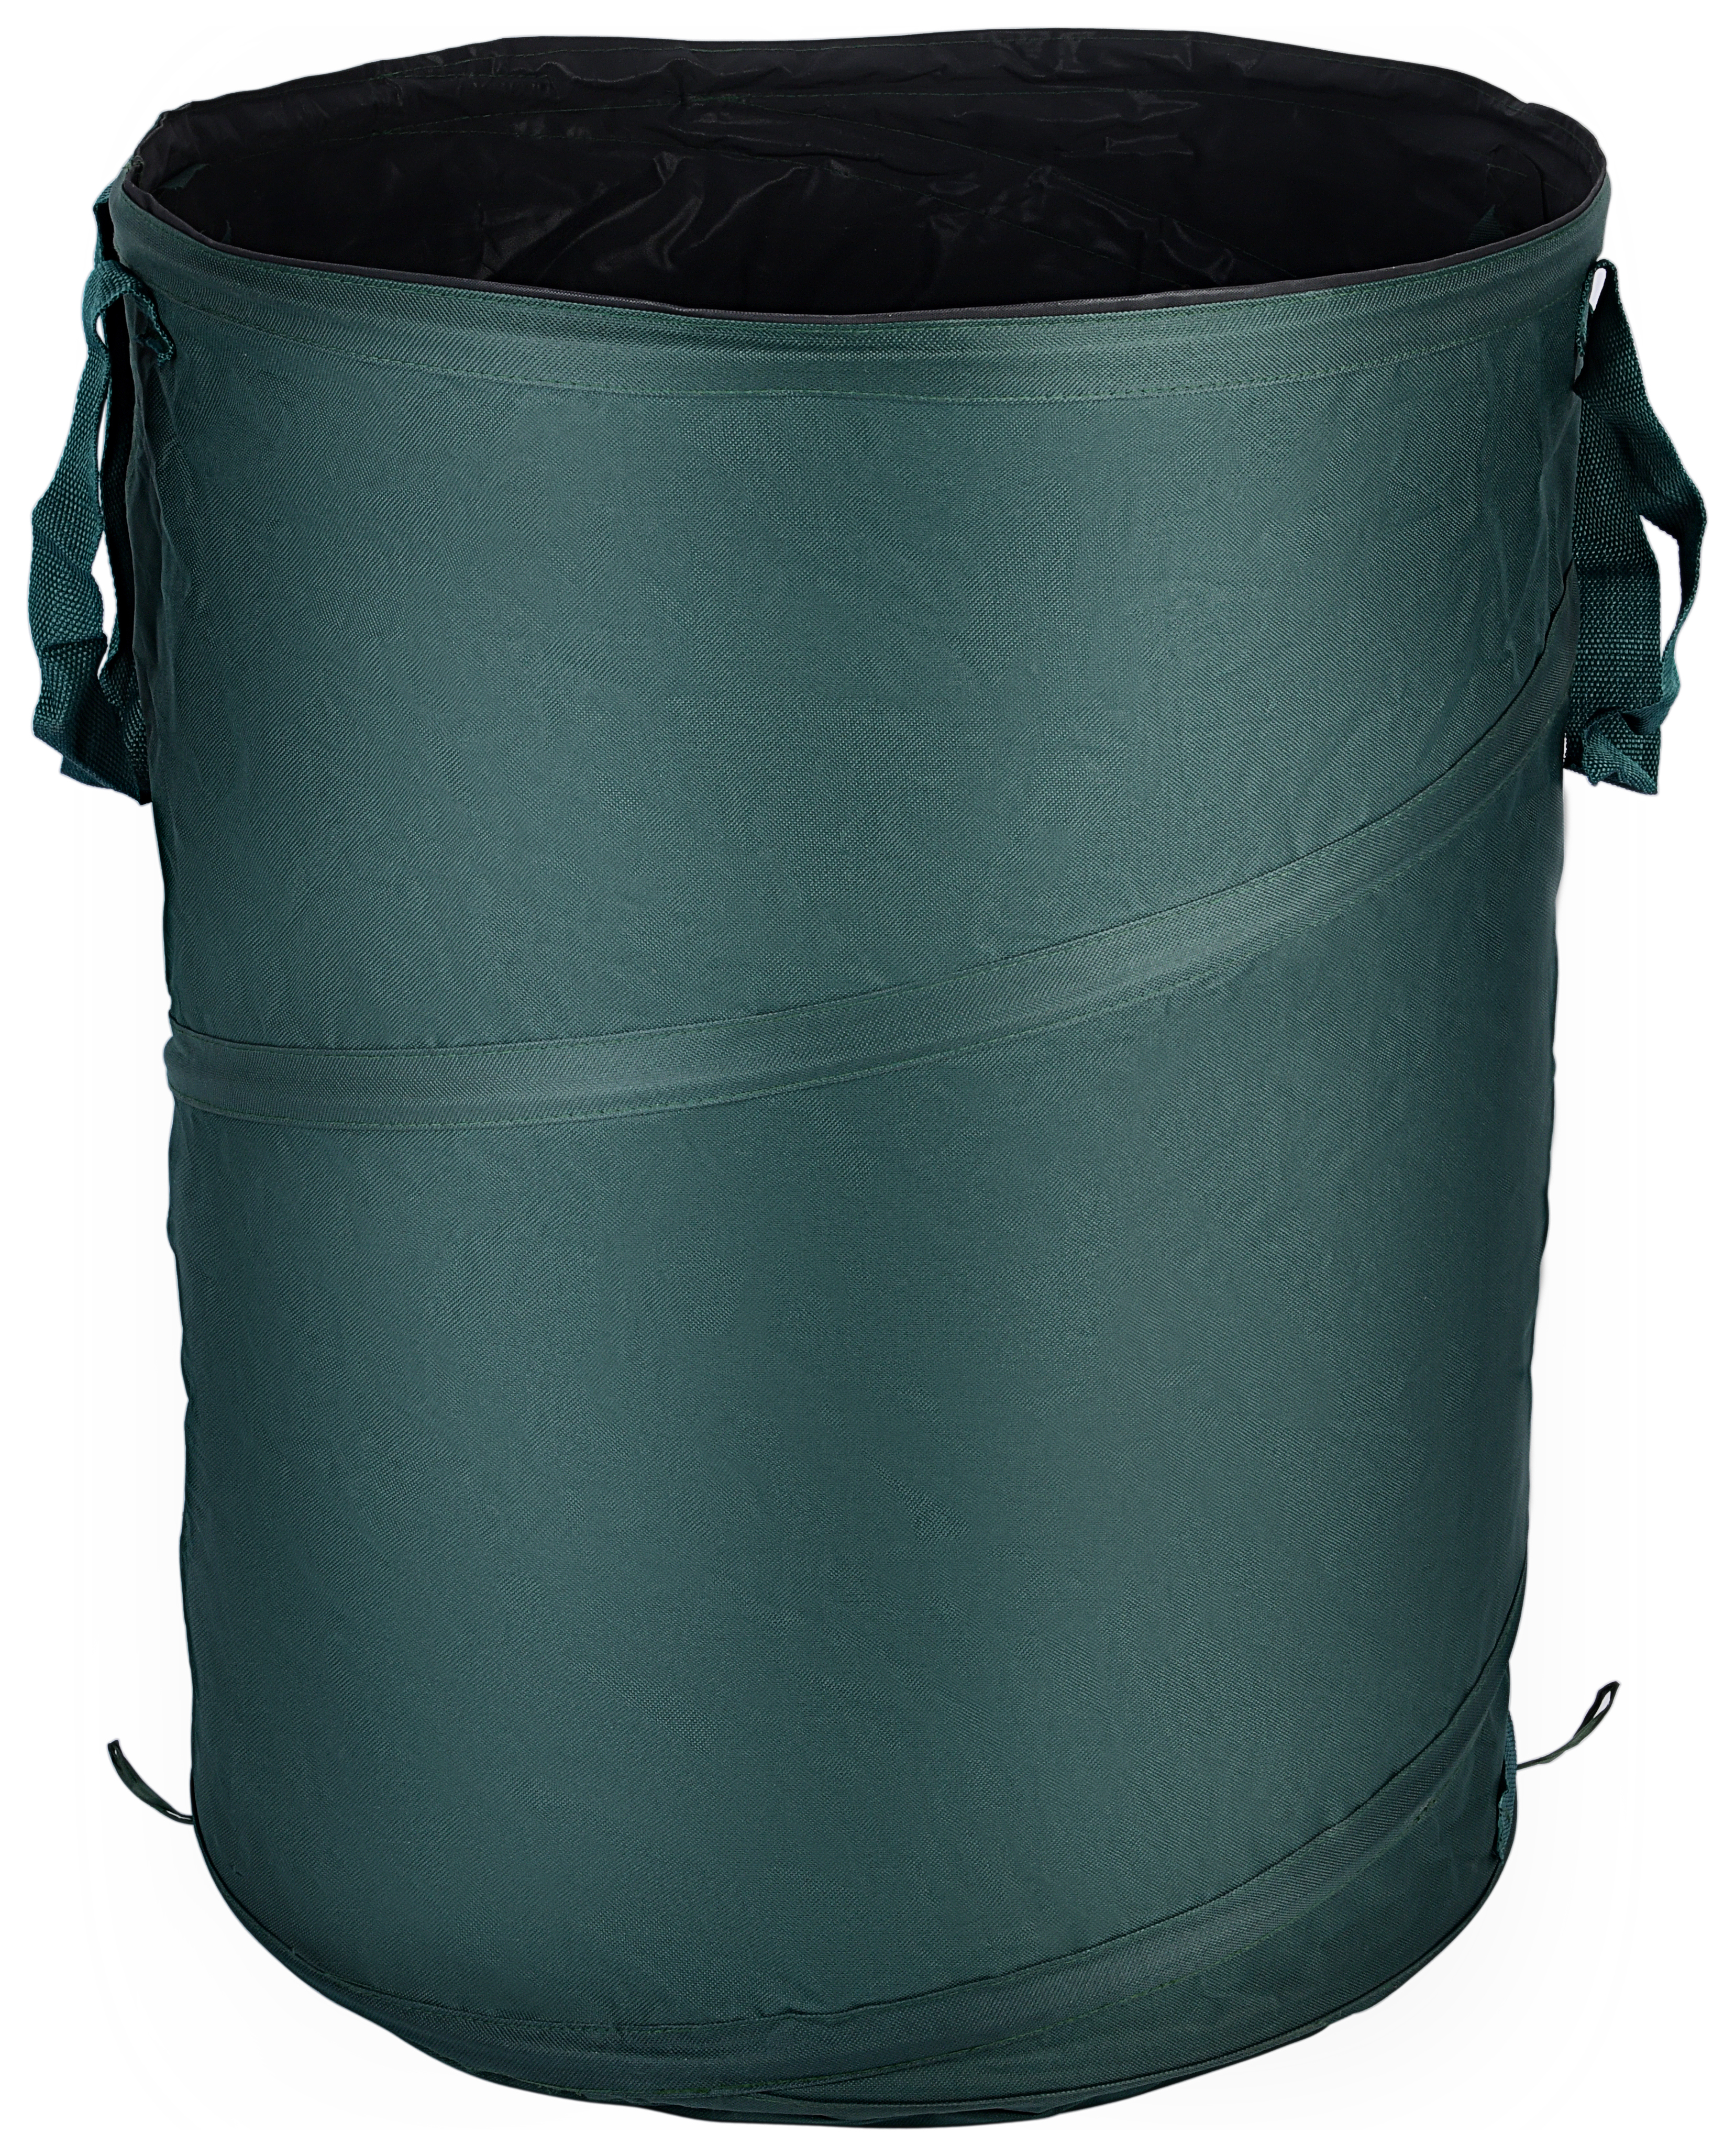 Image of Wickes Green Pop-up Garden Waste Bag - 156L